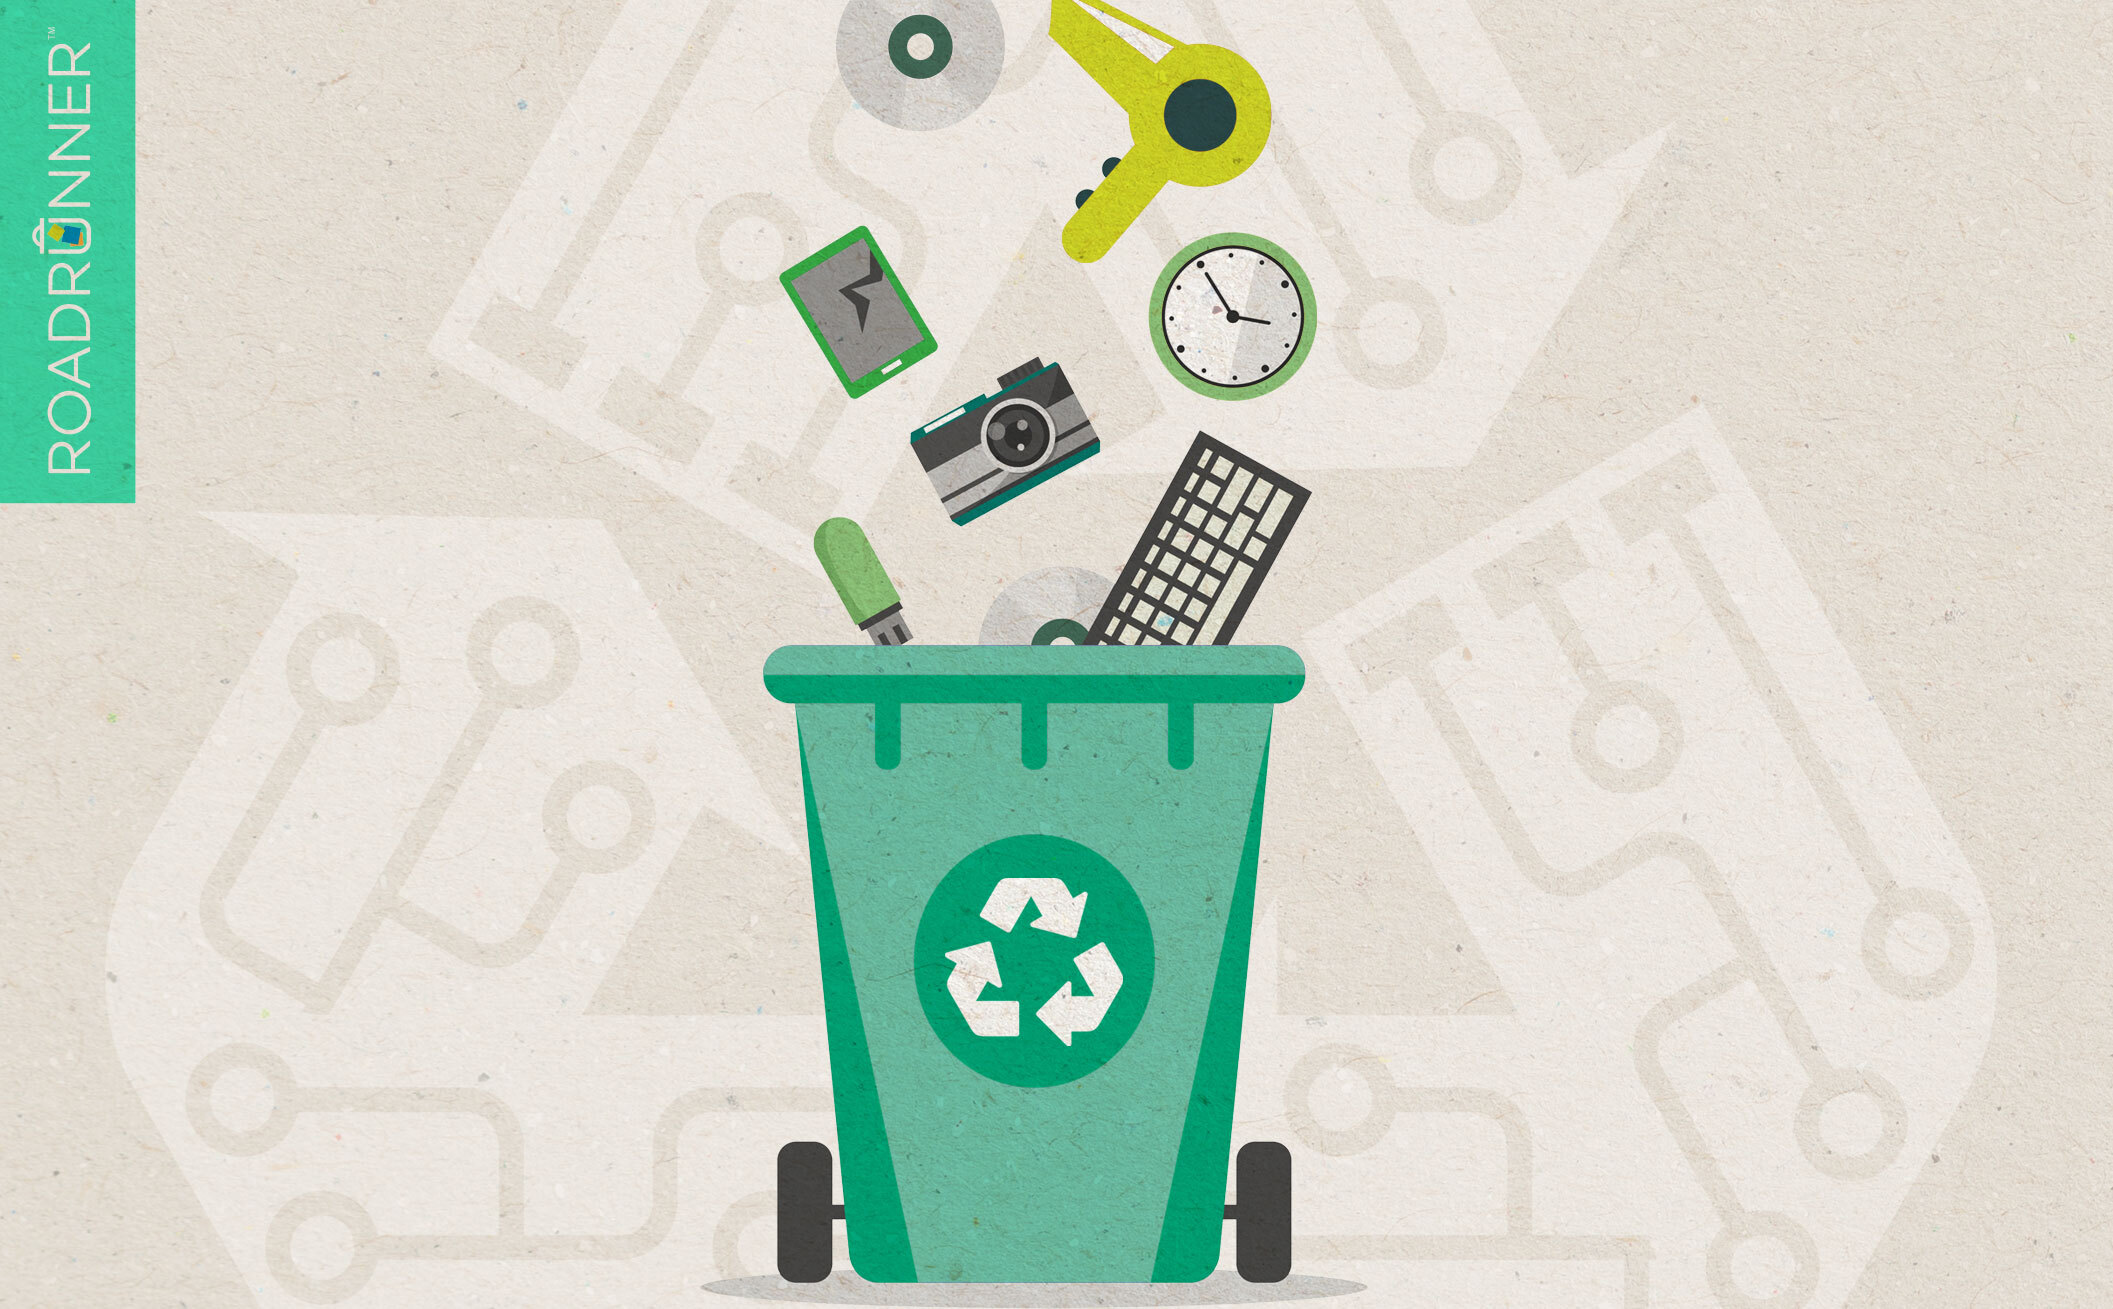 Your Business Can Pull the Plug on These 3 E-Waste Problems